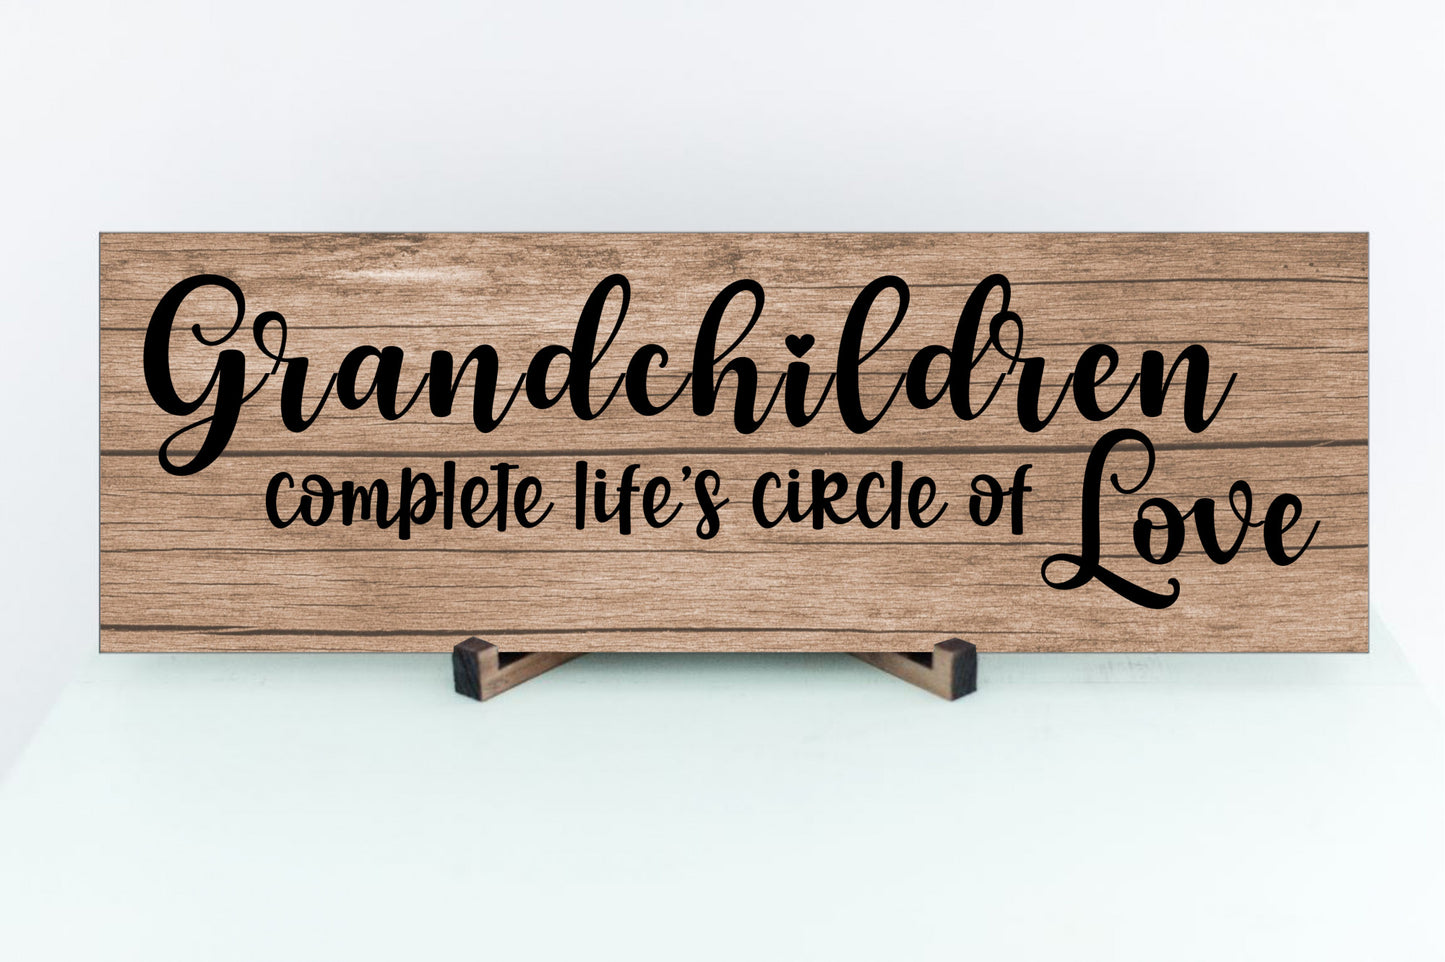 Grandchildren Complete Life's Circle of Love 15x5 Sign. Makes a great gift for Grandmothers and Grandfathers!